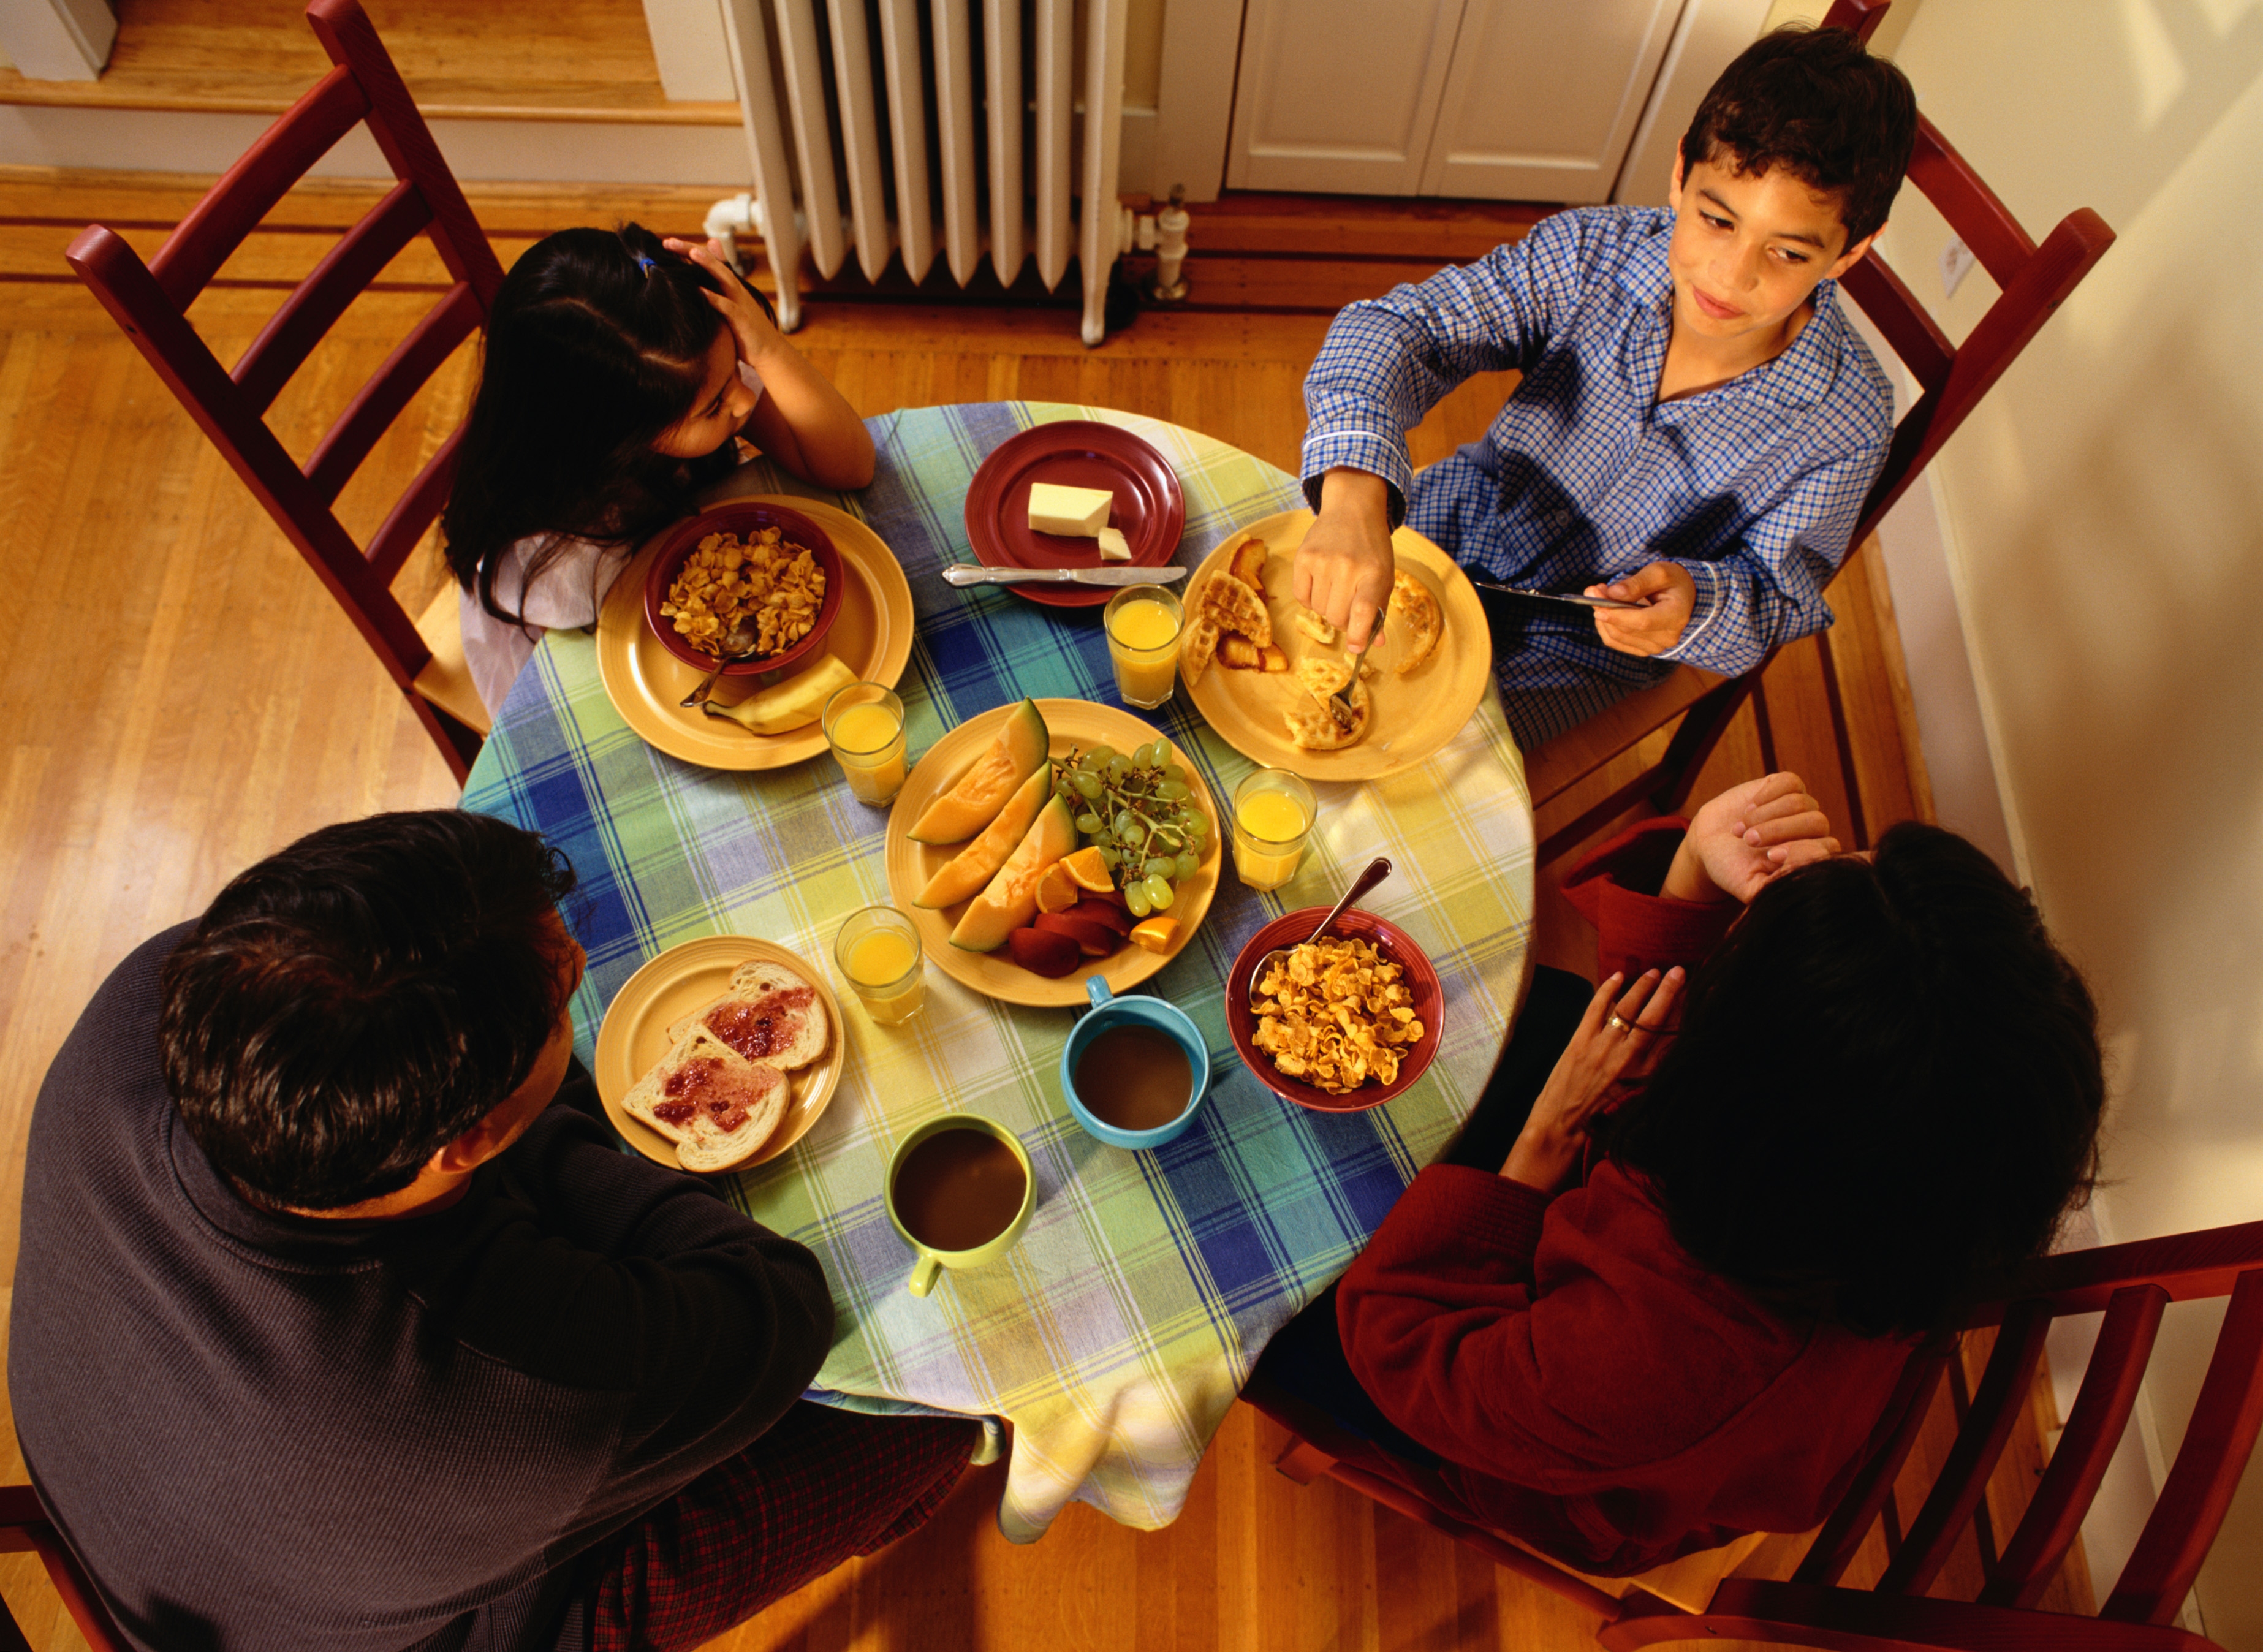 A family sits around a round table eating a meal together.